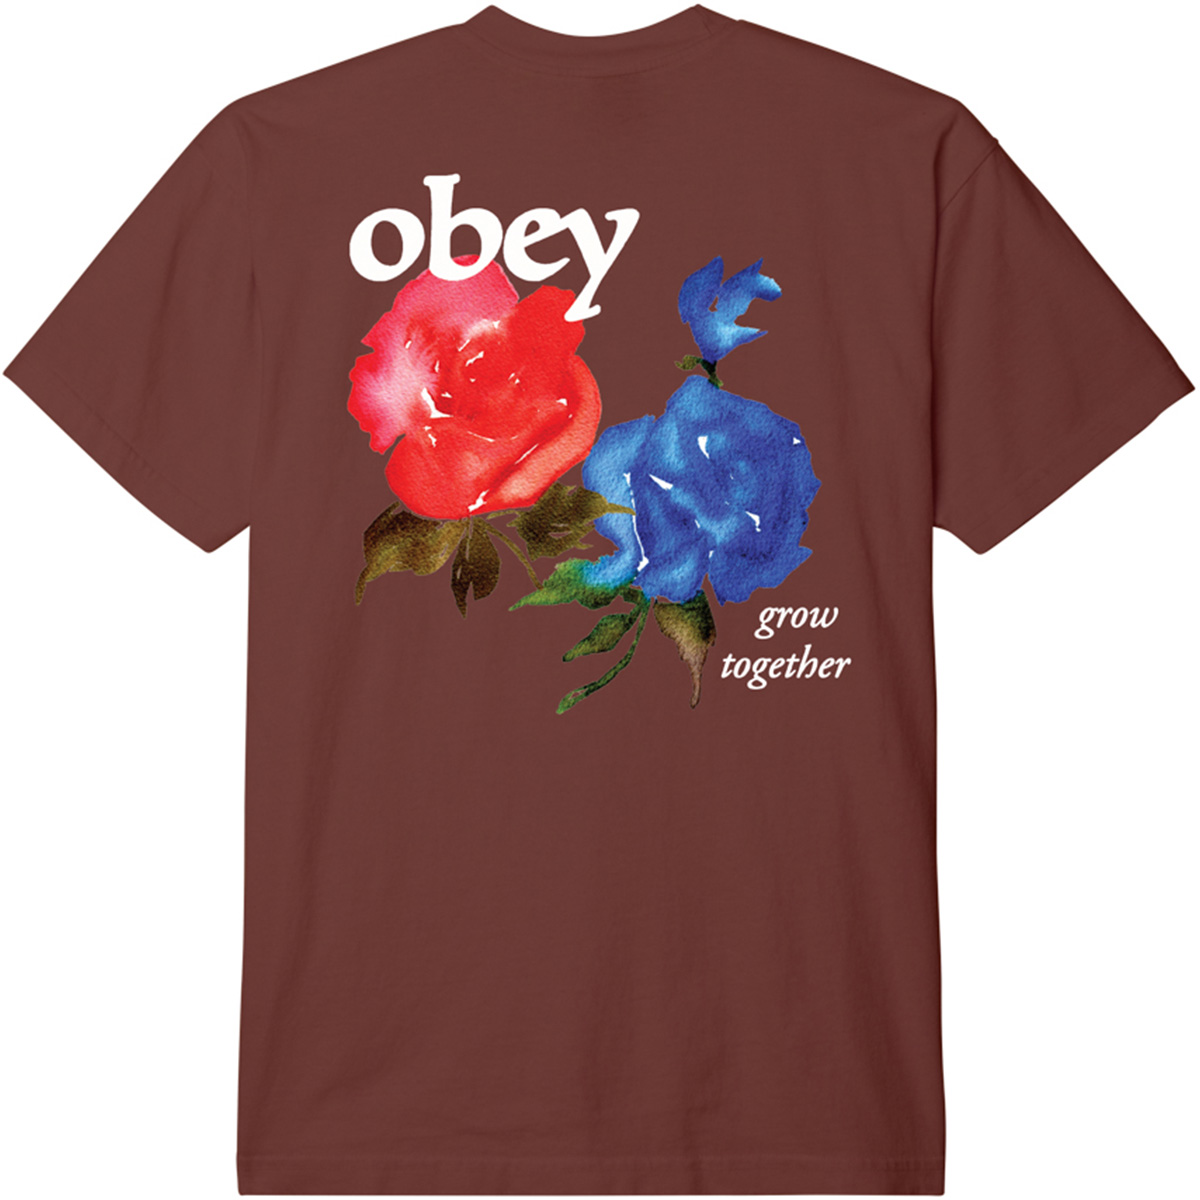 Obey Grow Together T-Shirt Sepia